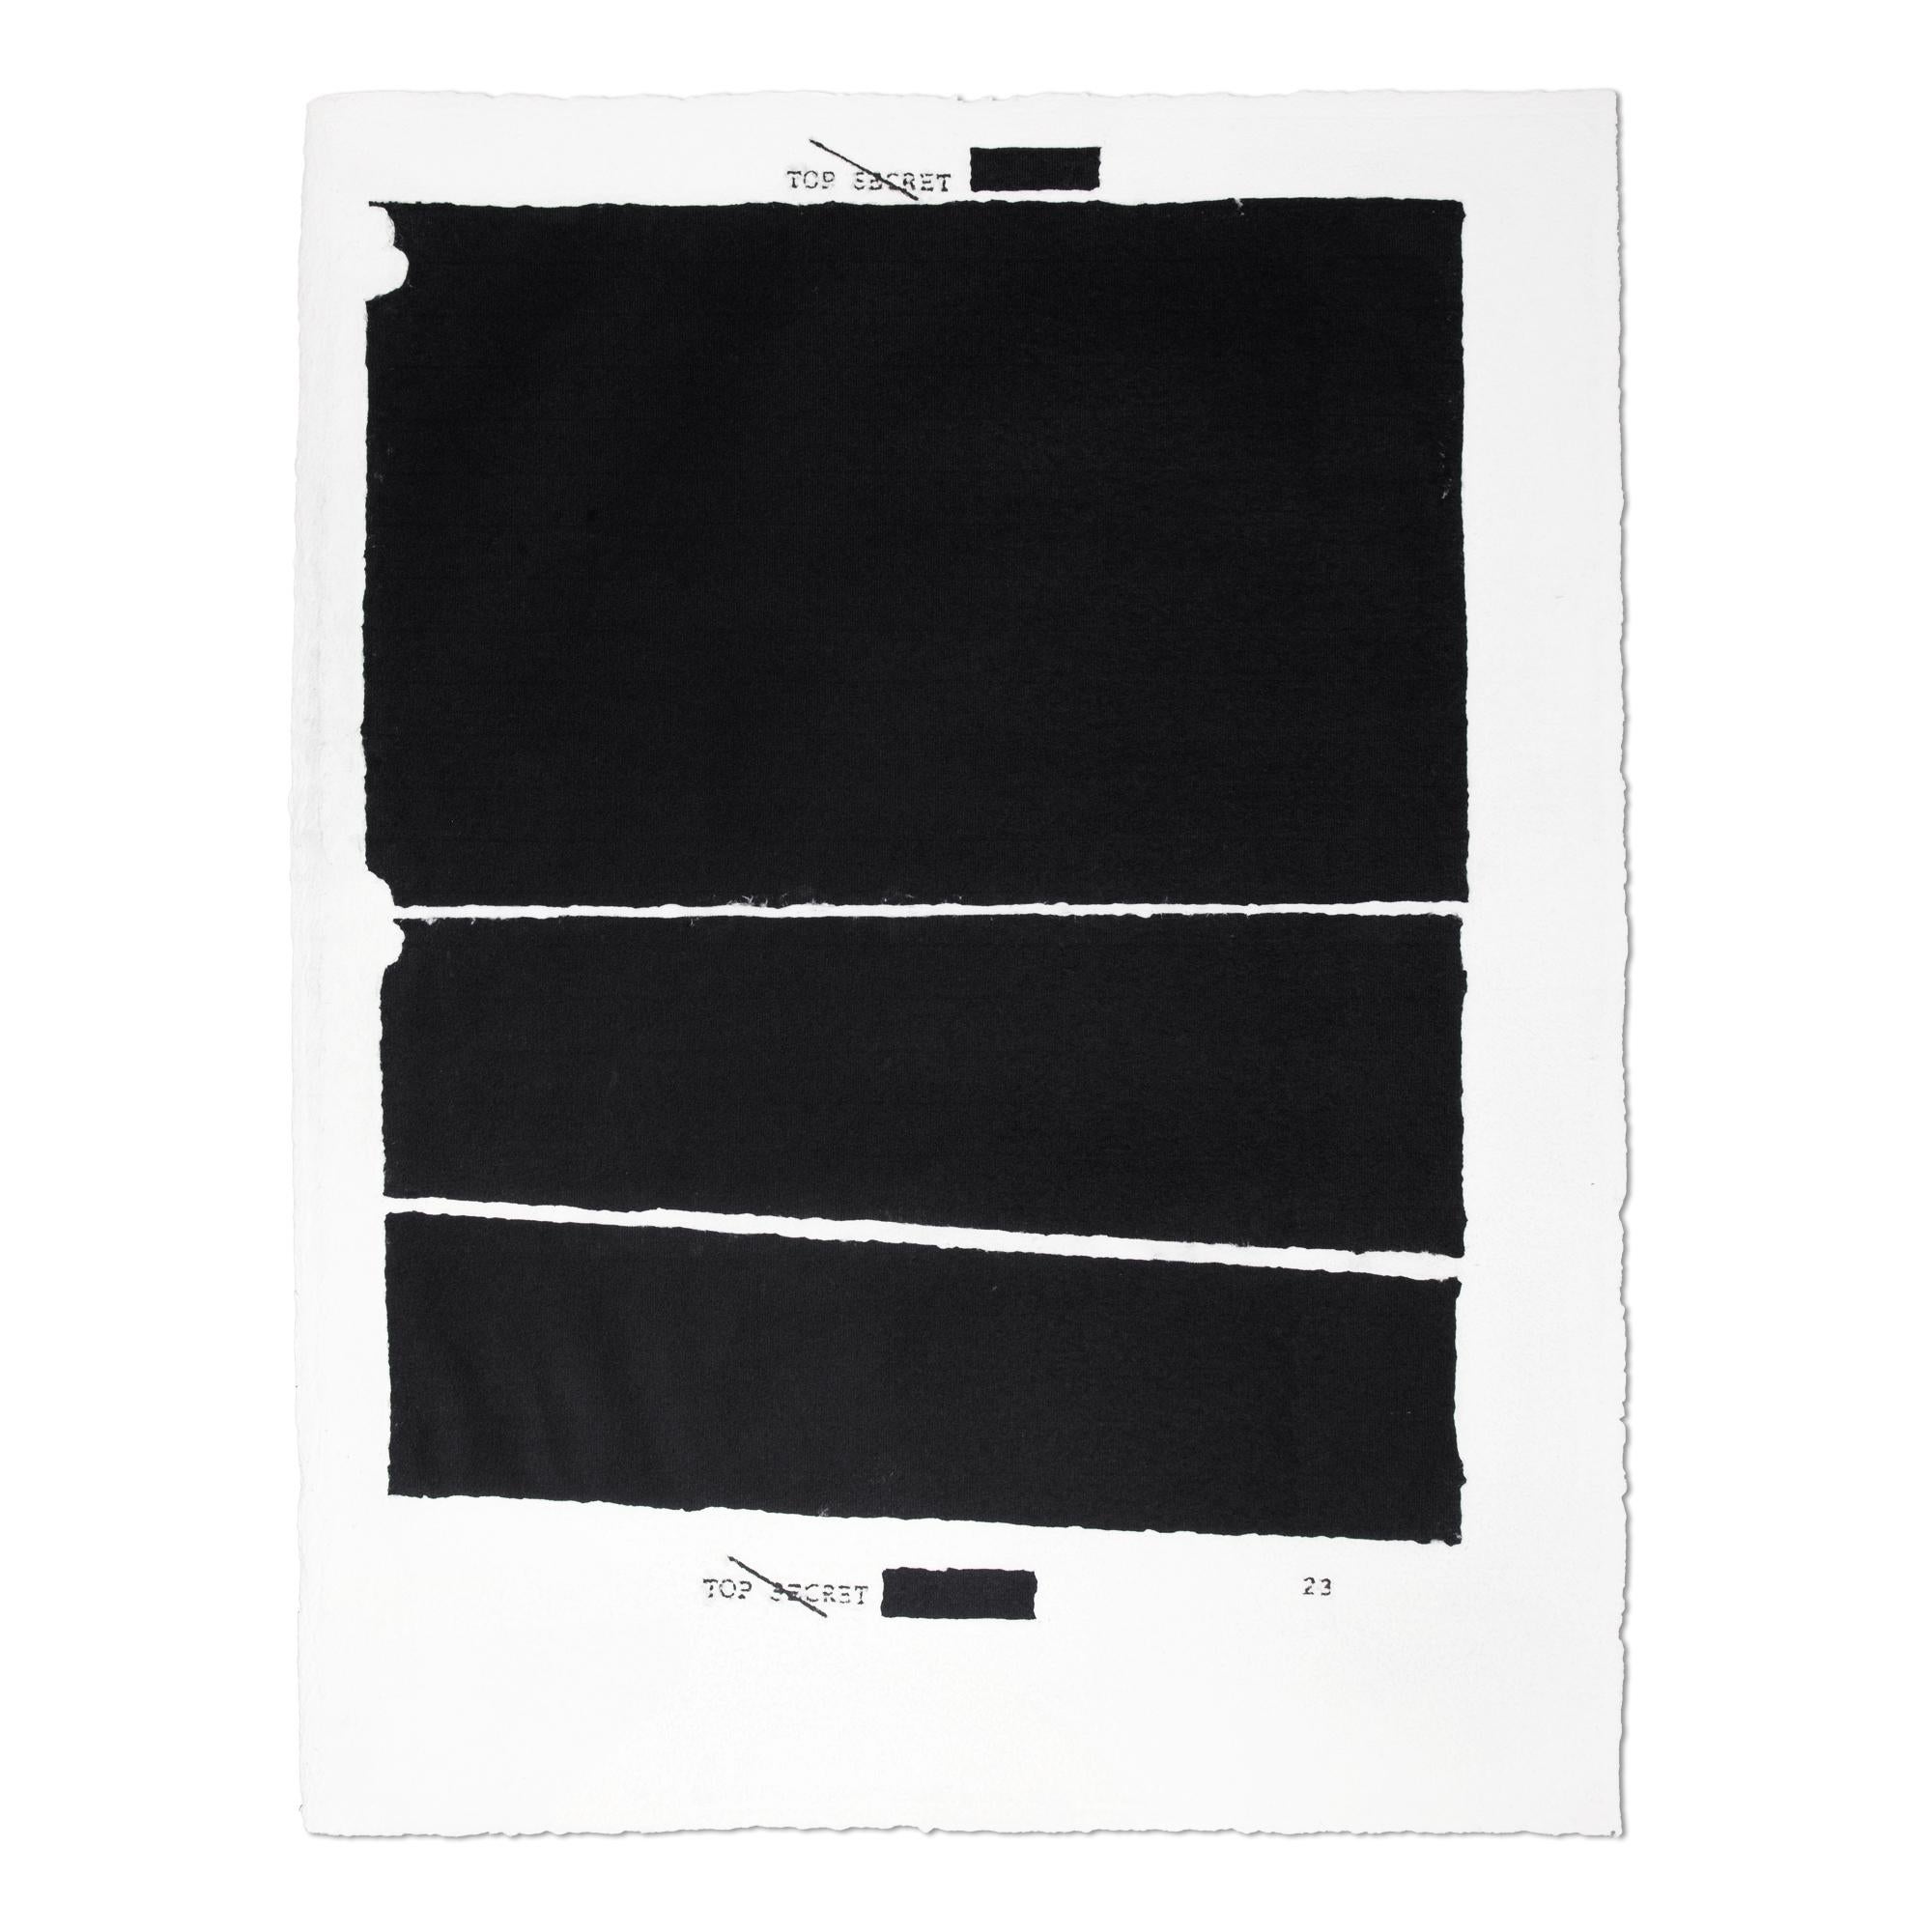 Jenny Holzer (American, b. 1950)
Top Secret 23, 2012
Medium: Black pulp on white handmade paper, stenciled
Dimensions: 90.5 × 70 cm (35 3/5 × 27 3/5 in)
Edition: From the series “Water Boarding”. Edition size undisclosed
Publisher: Griffelkunst,